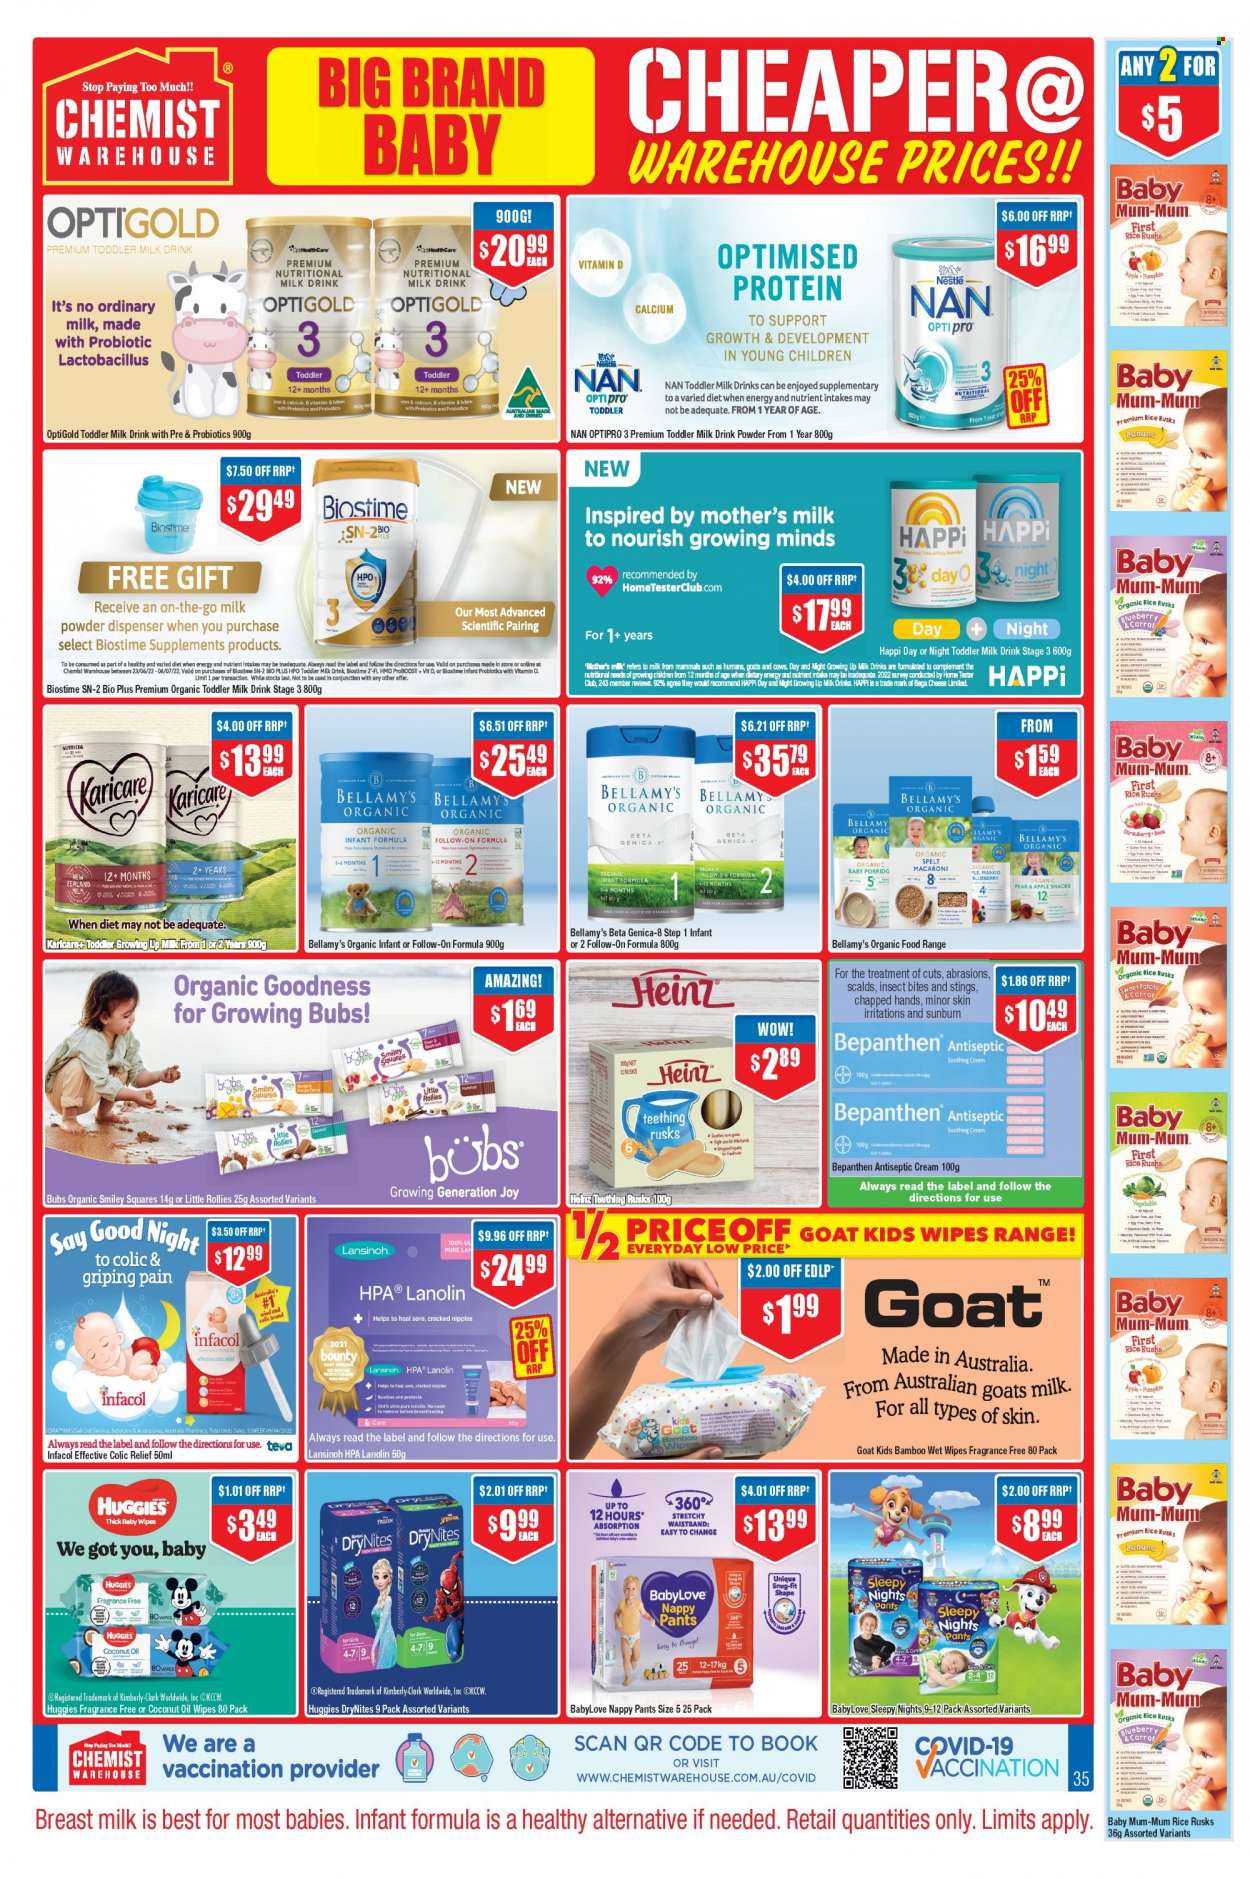 thumbnail - Chemist Warehouse Catalogue - 23 Jun 2022 - 6 Jul 2022 - Sales products - wipes, Huggies, pants, baby wipes, nappies, DryNites, BabyLove, Bounty, Joy, Mum, calcium, Nestlé, antiseptic cream. Page 35.